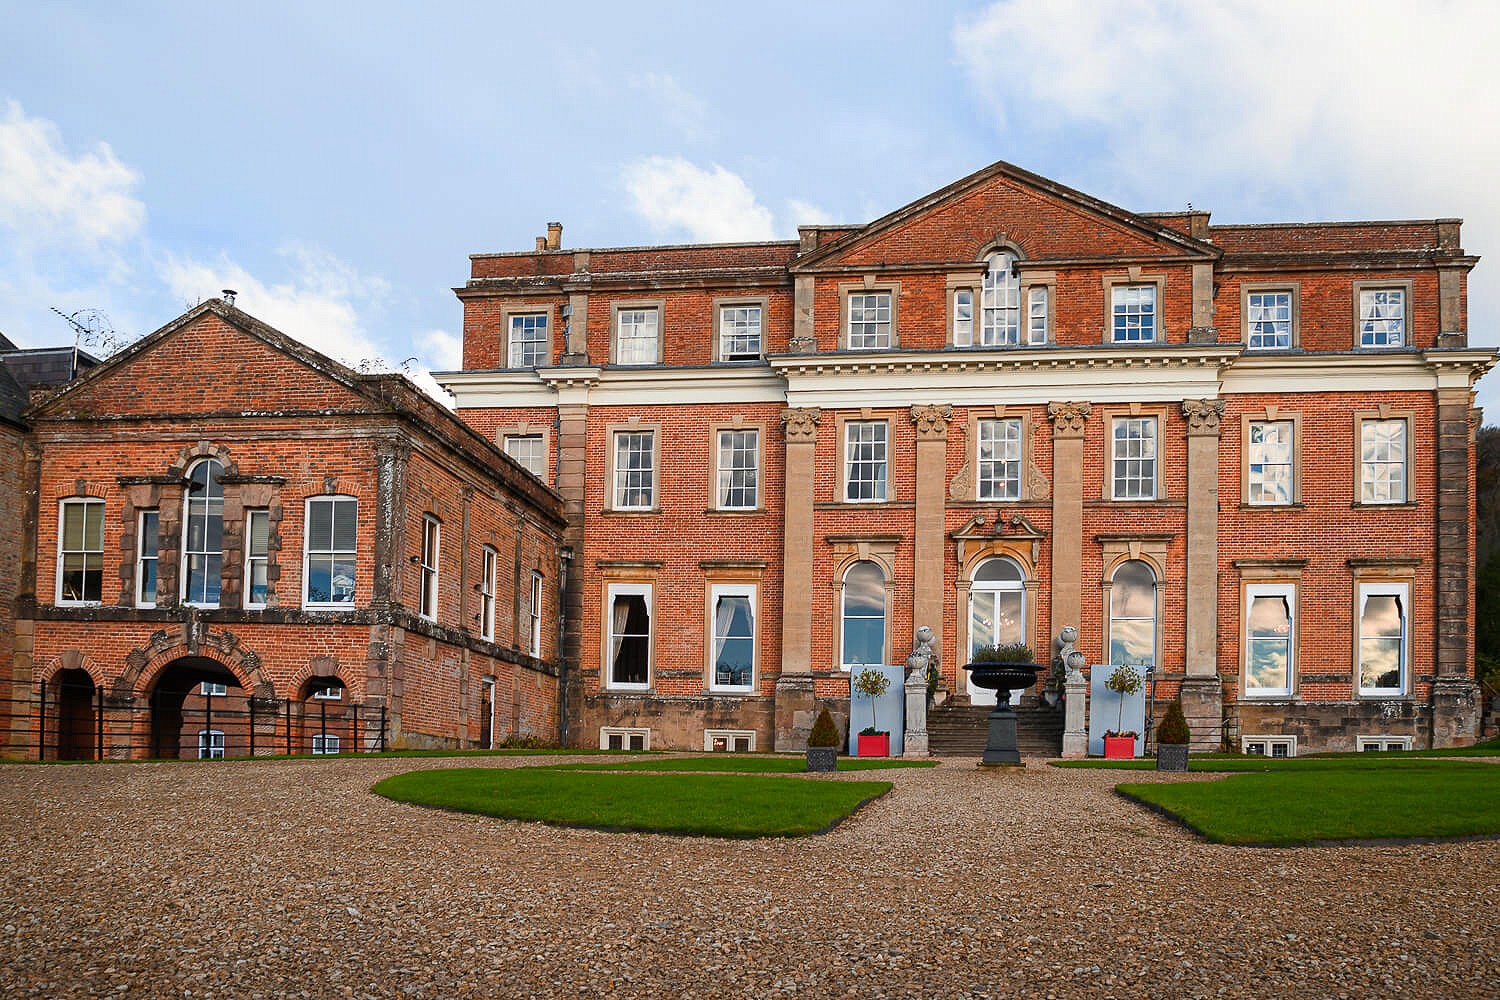 A grand historic red brick mansion with evenly spaced white windows, two main doors, and an ornate stone urn in the center, set against a blue sky with clouds, and surrounded by a gravel courtyard.